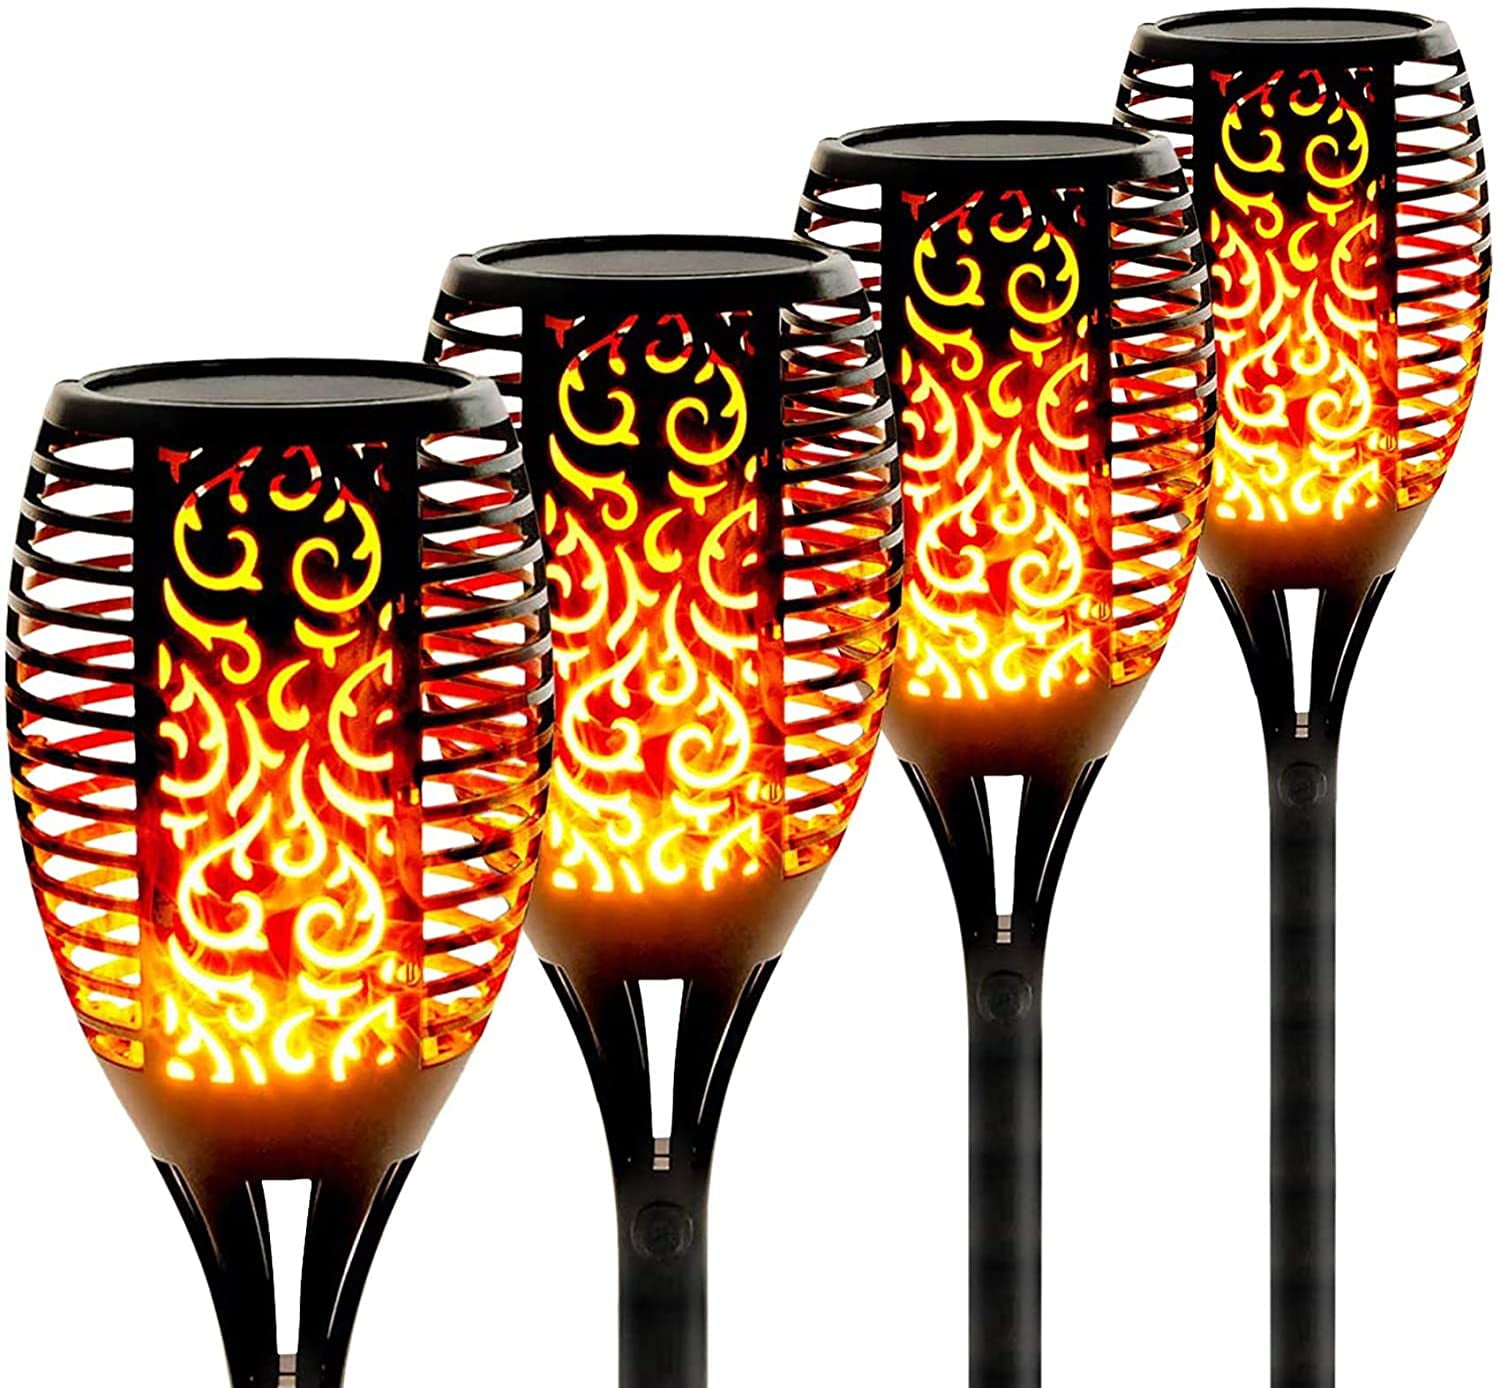 4 Pack Solar Torch Light with Flickering Flame Landscape Tiki Torches Decoration 